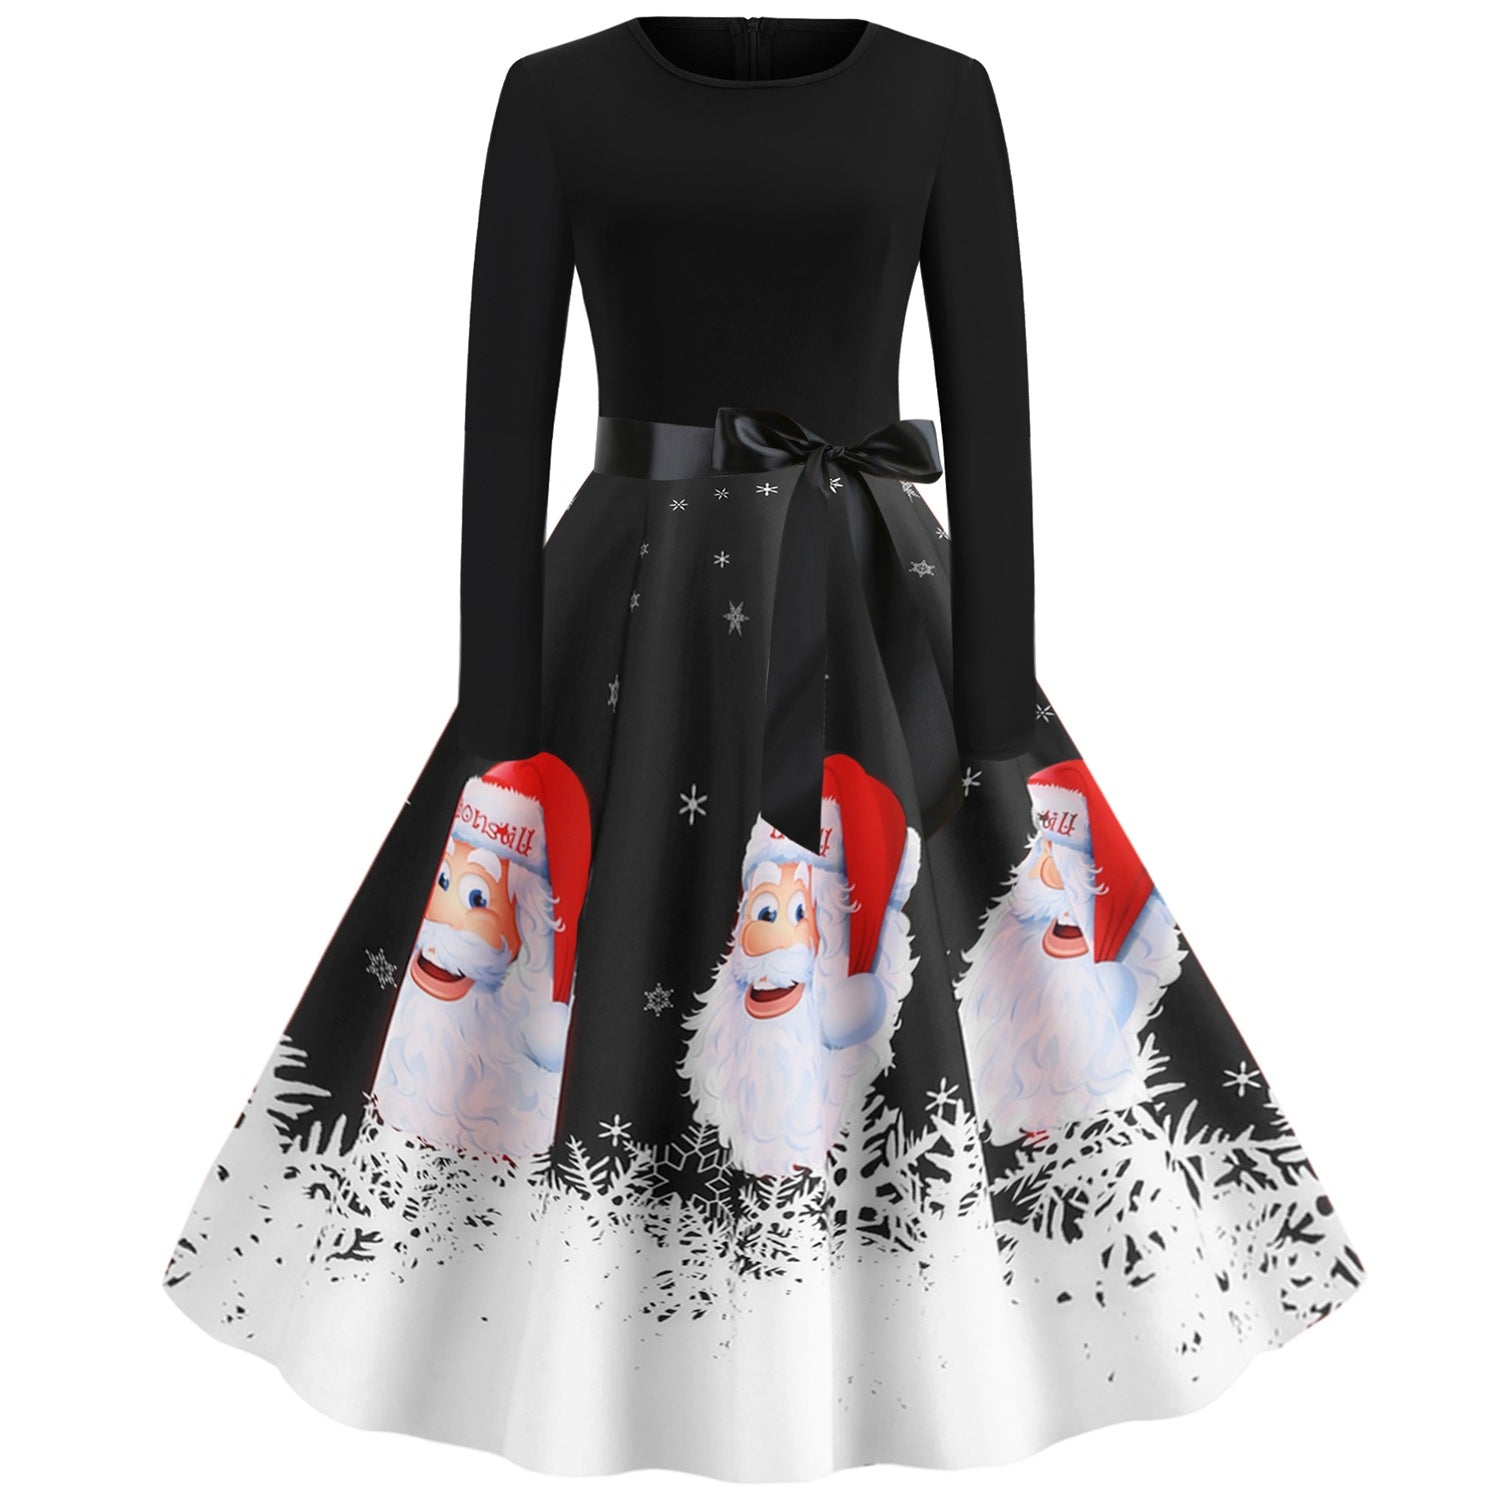 Vintage Merry Christmas Round Neck Long Sleeves Dresses-Black-S-Free Shipping at meselling99